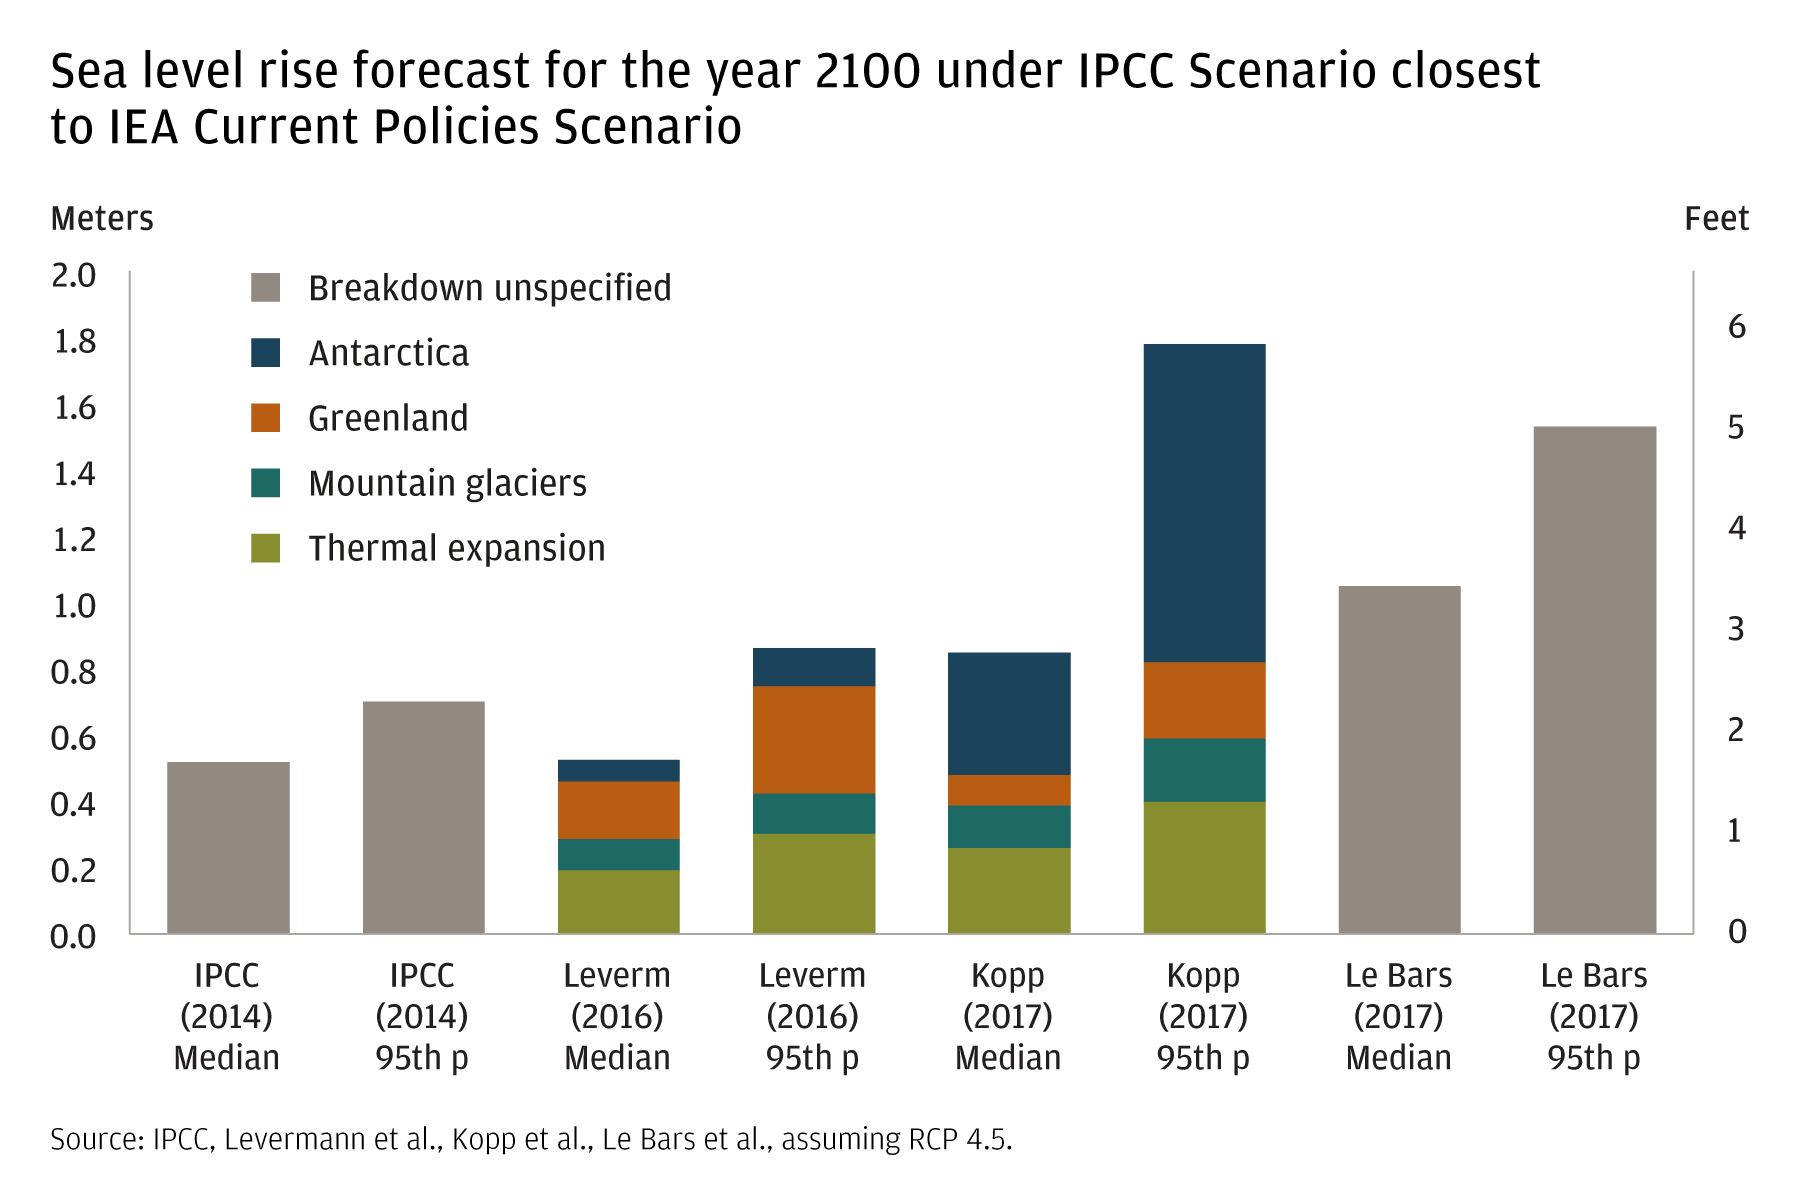 This bar chart shows expected sea level rise by the year 2100 according to different models. Depending on the model, total estimated sea level rise ranges between a low of below 2 feet and a high around 6 feet. 